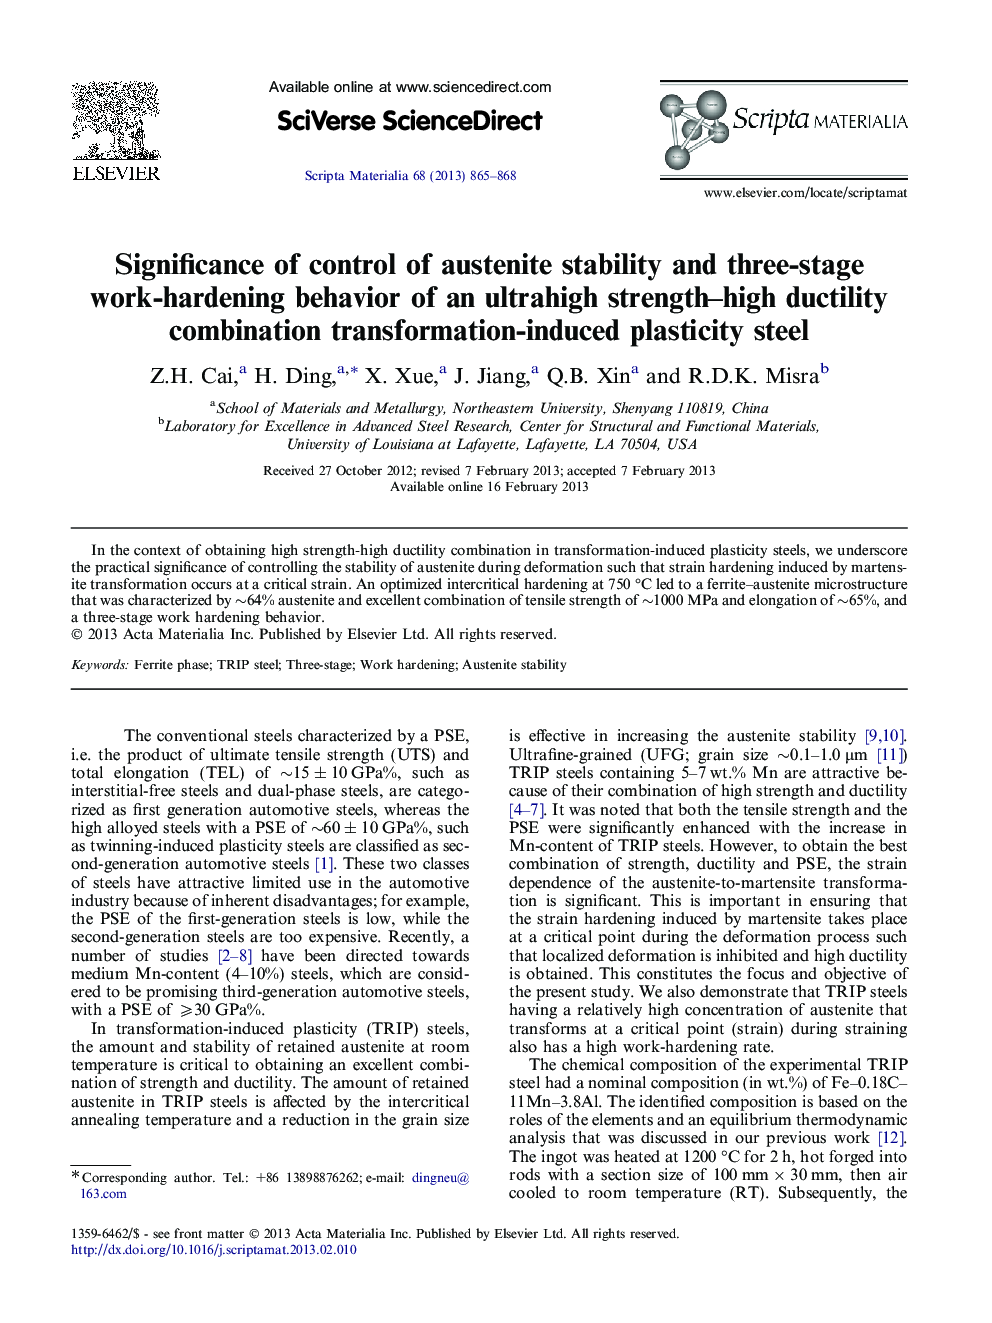 Significance of control of austenite stability and three-stage work-hardening behavior of an ultrahigh strength–high ductility combination transformation-induced plasticity steel